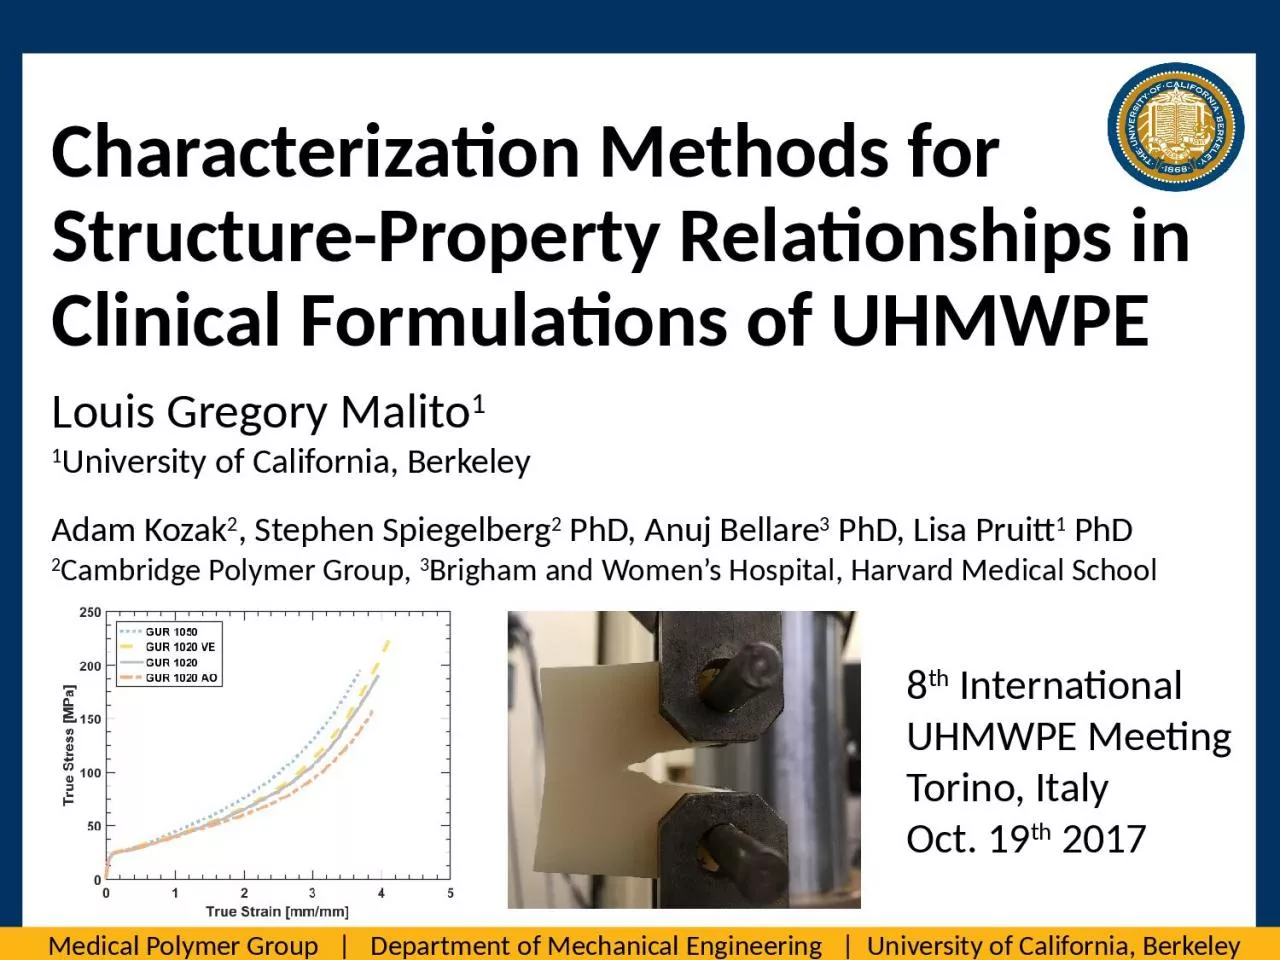 Characterization Methods for Structure-Property Relationships in Clinical Formulations